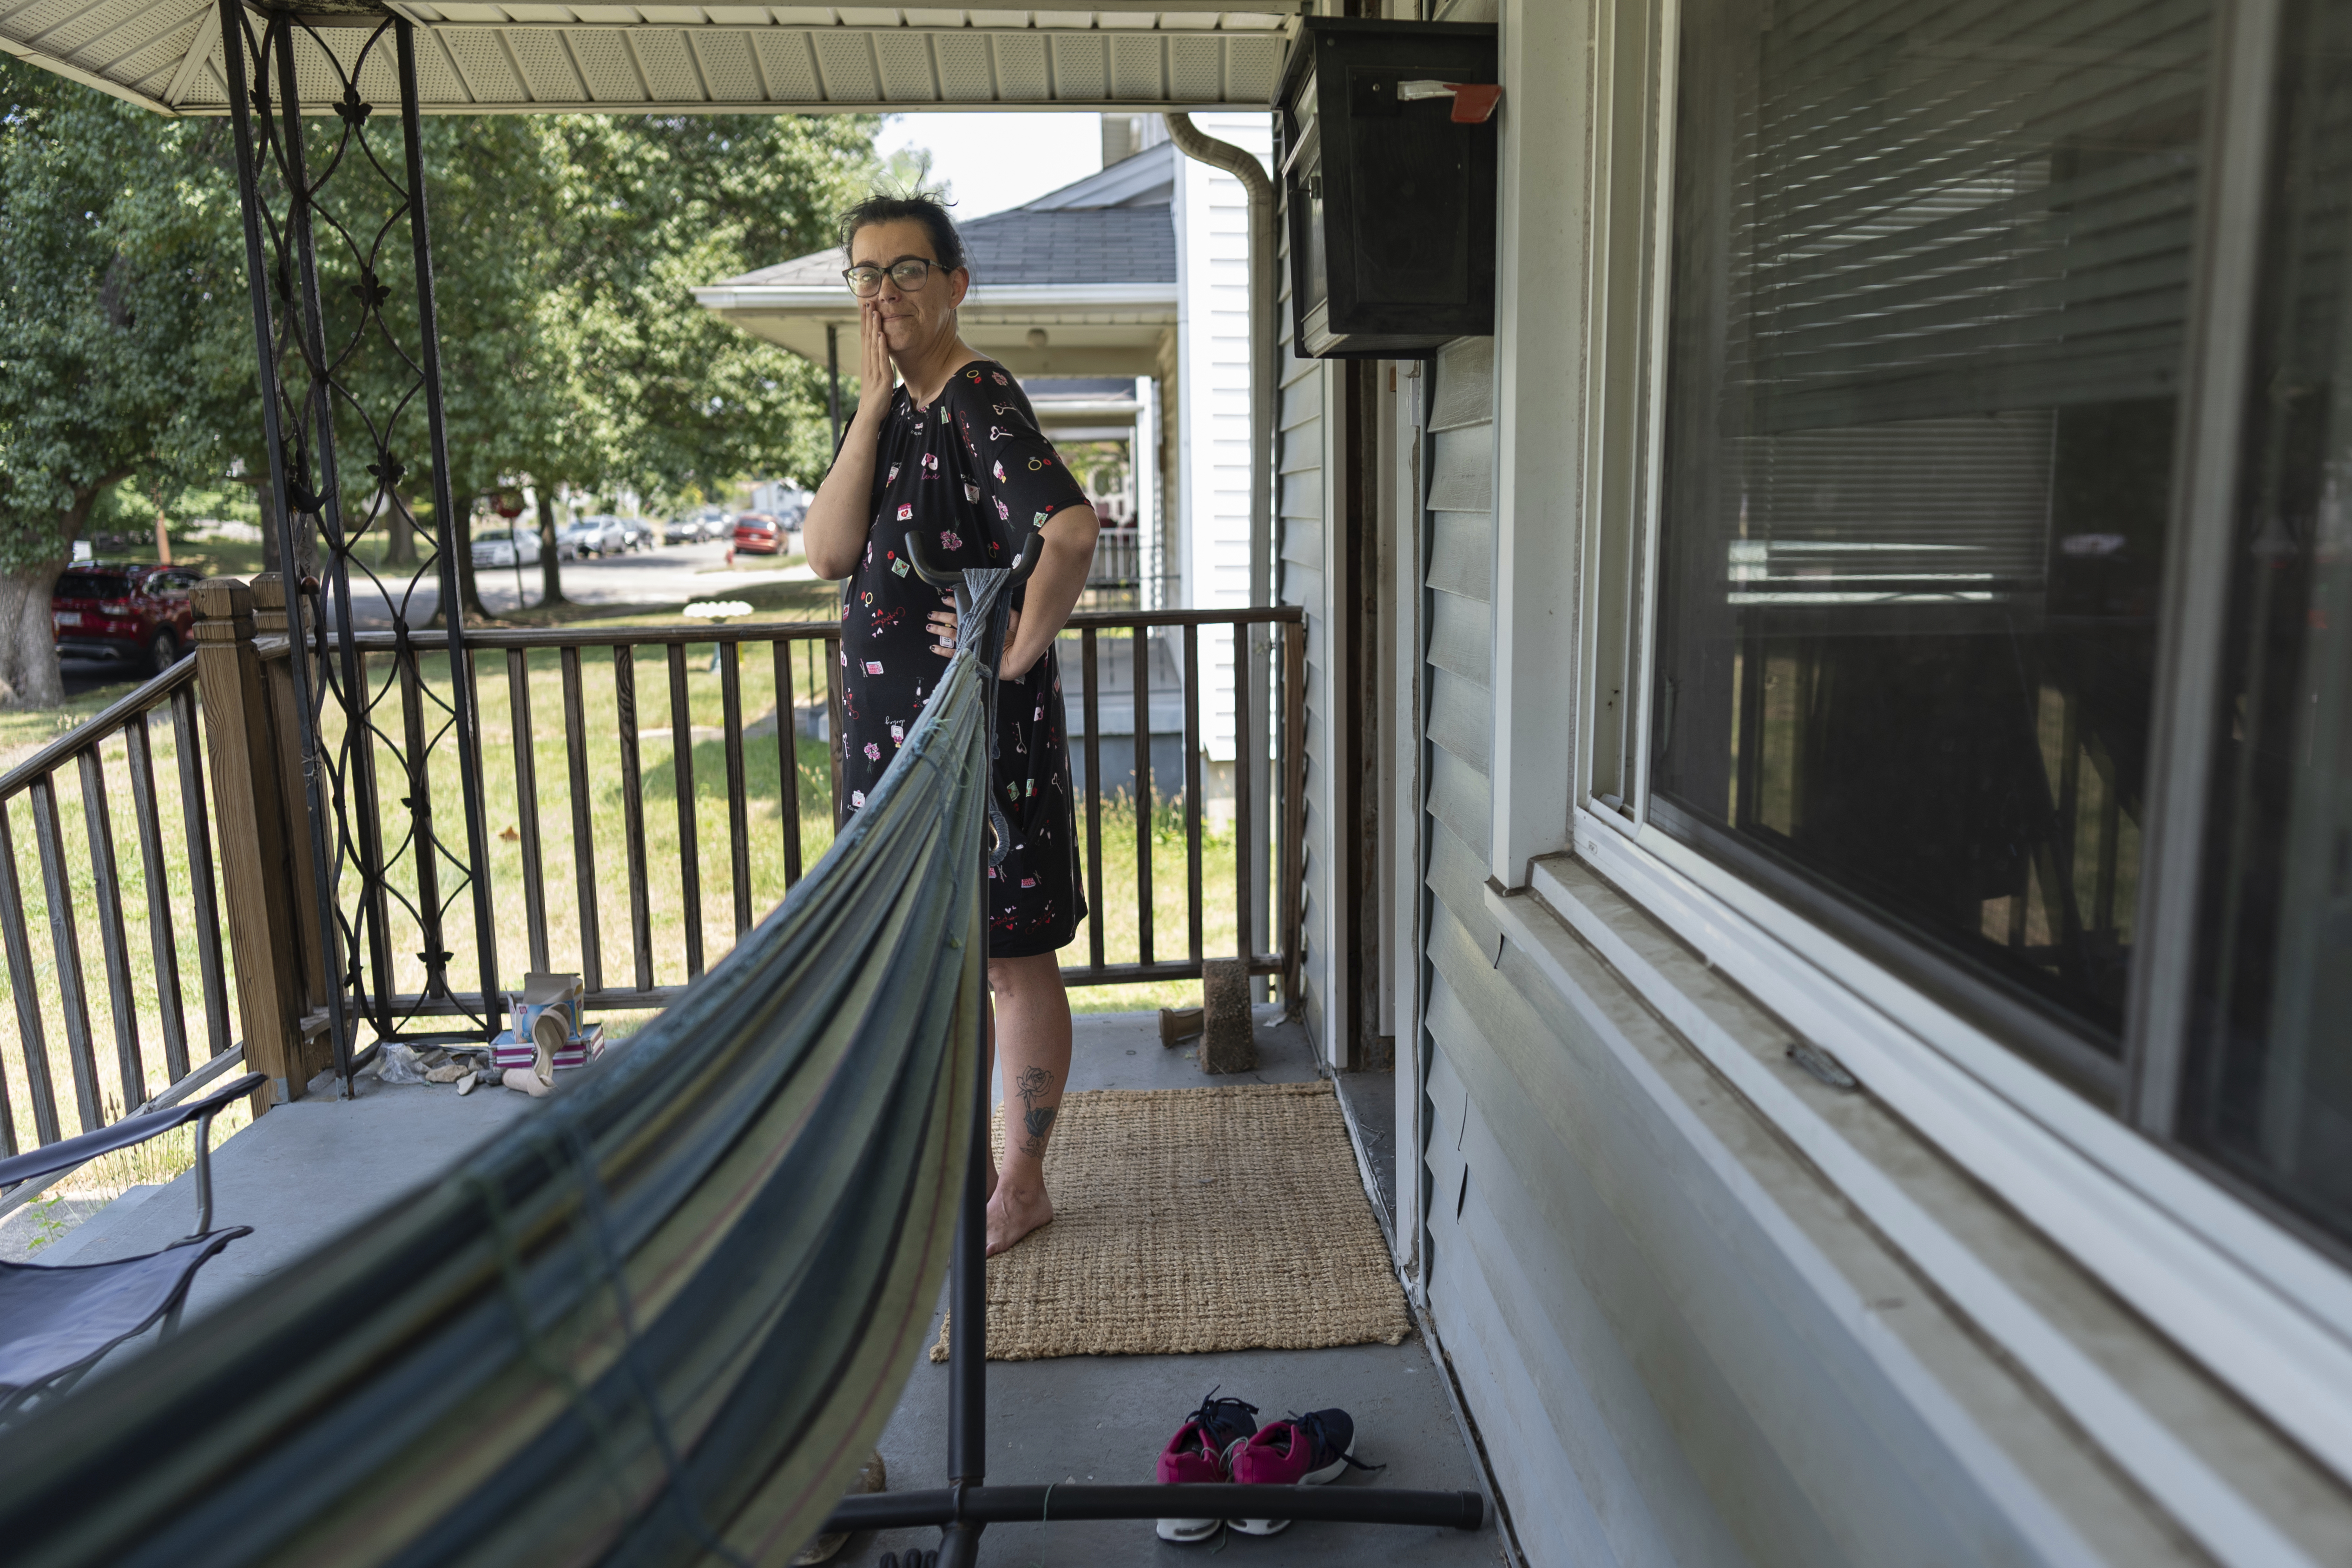 Amanda Bailey, 35, stands on her front porch on Friday, June 21, 2024, in Middletown, Ohio. This house, where Bailey and her family live, is the same house where “Hillbilly Elegy” author Sen. J.D. Vance, R-Ohio, grew up. Bailey said she thought “Hillbilly Elegy” nailed it, and that former President Donald Trump and Vance would “make a great team.” (AP Photo/Carolyn Kaster)